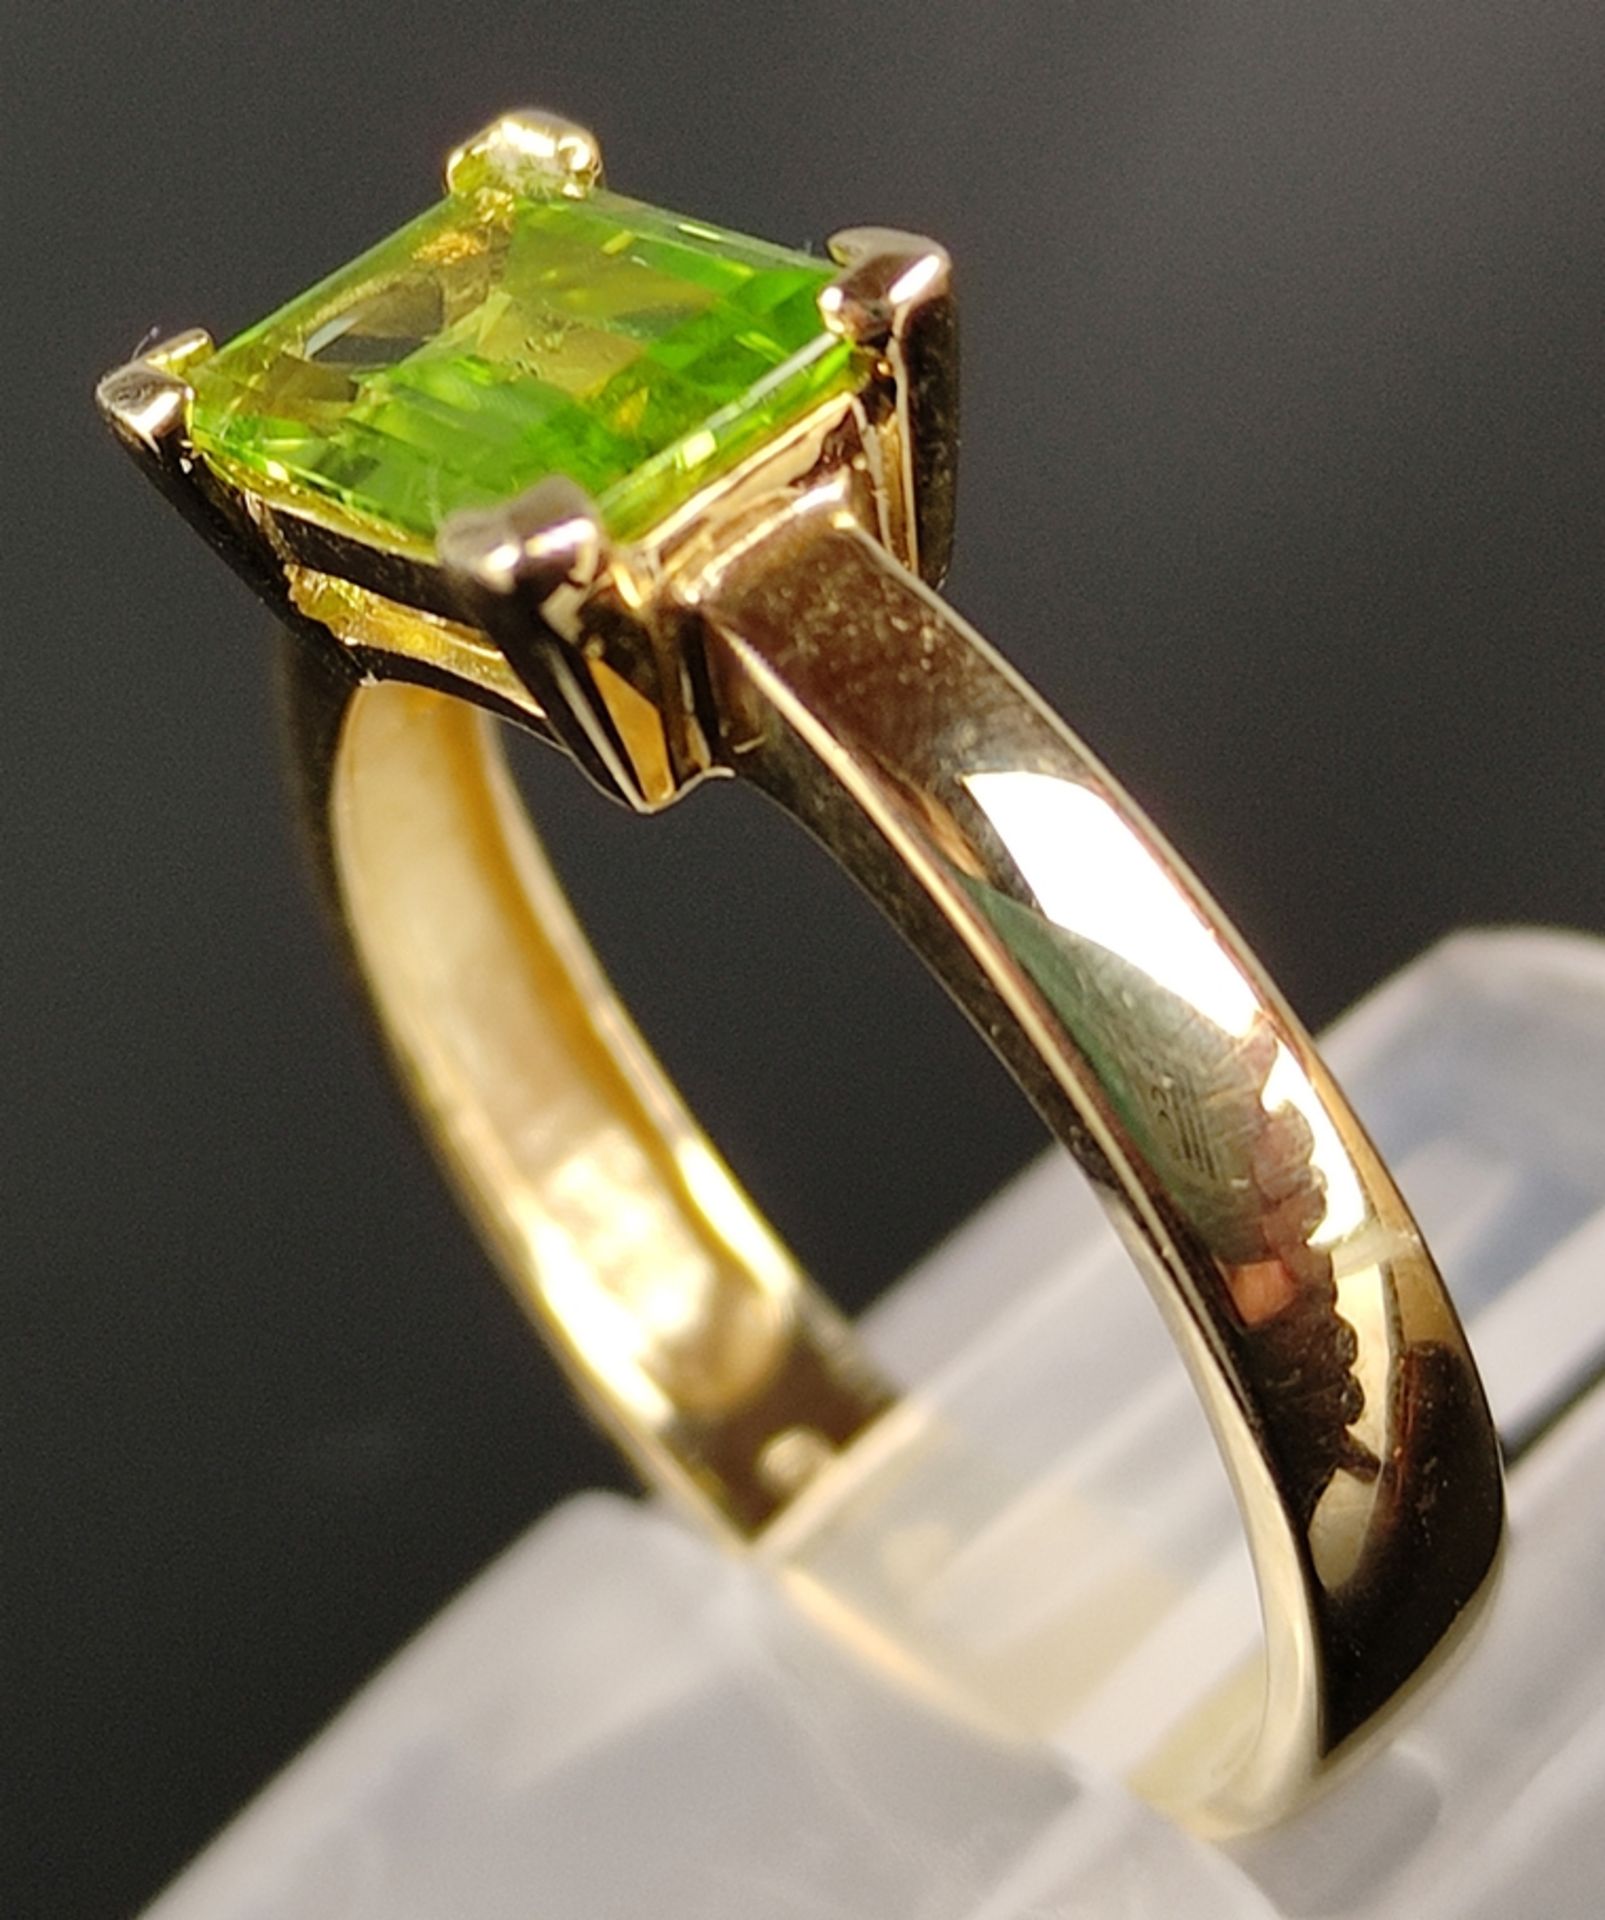 Bandring mit Peridot im Treppen-Schliff, 585/14K Gelbgold, 3g, Größe 55Band ring with staircase - Image 3 of 5